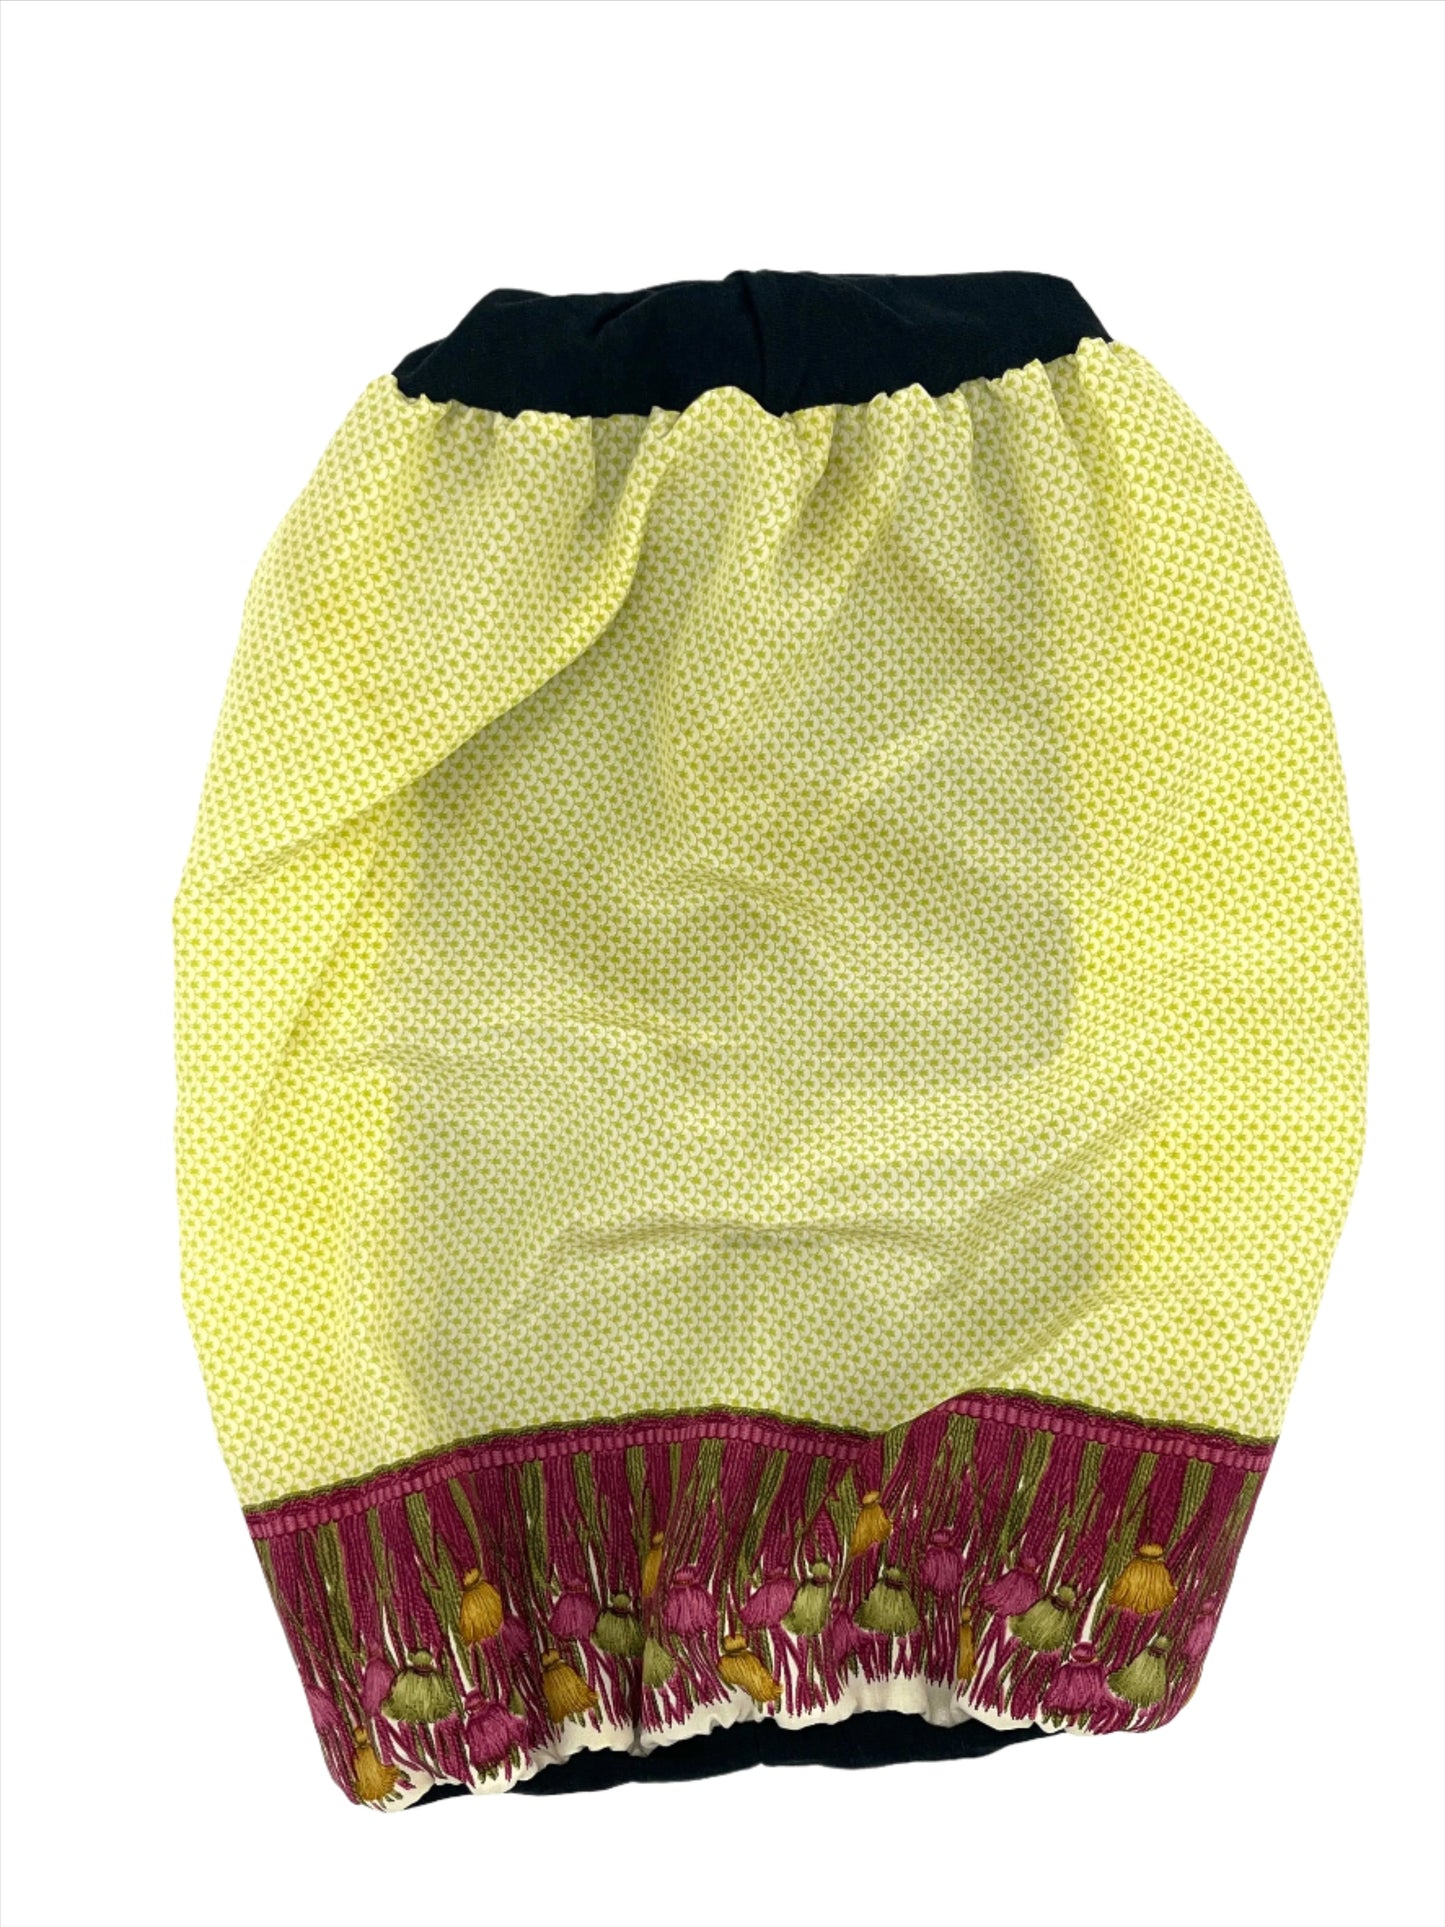 Black, yellow and pink silk lined bamboo hair wrap SilkGenie